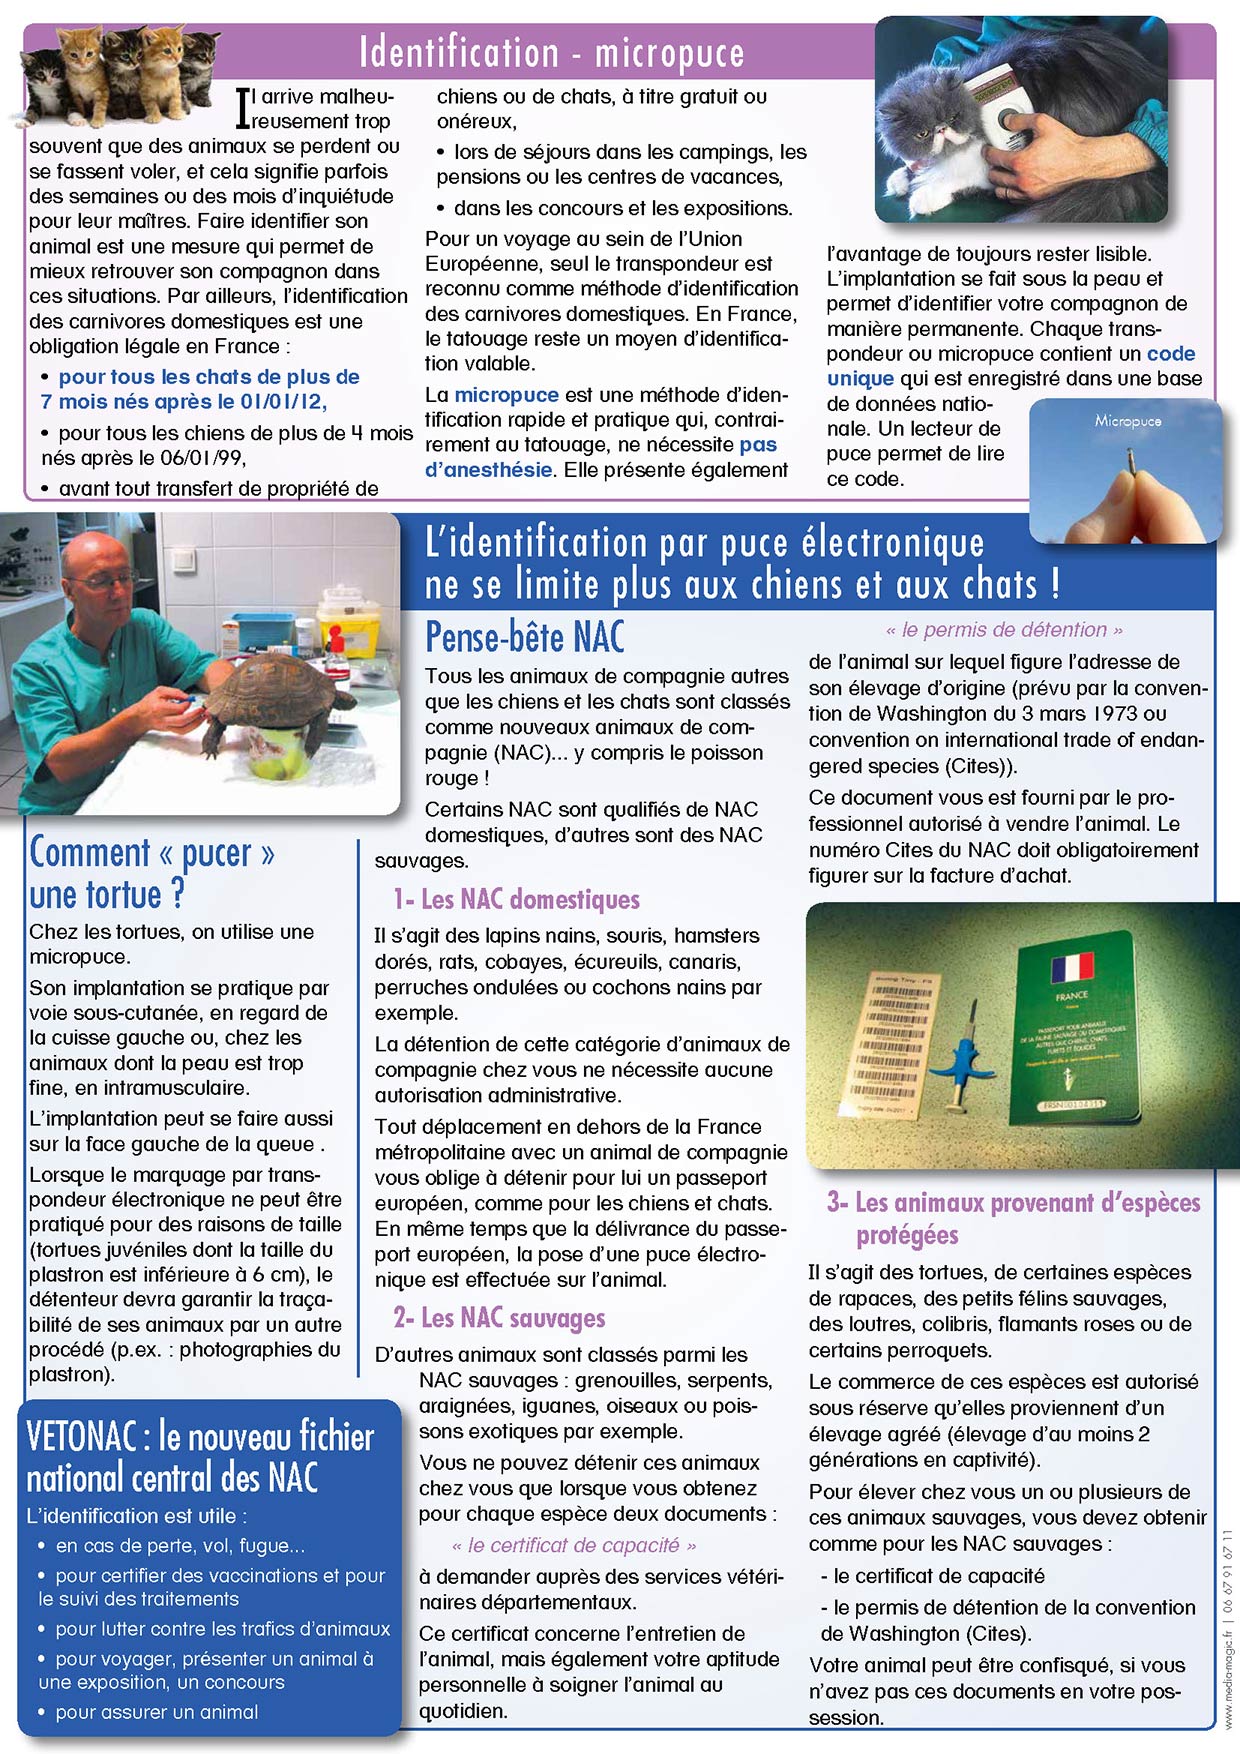 PARME Infos N°3 - Hiver 2013-14 page 2